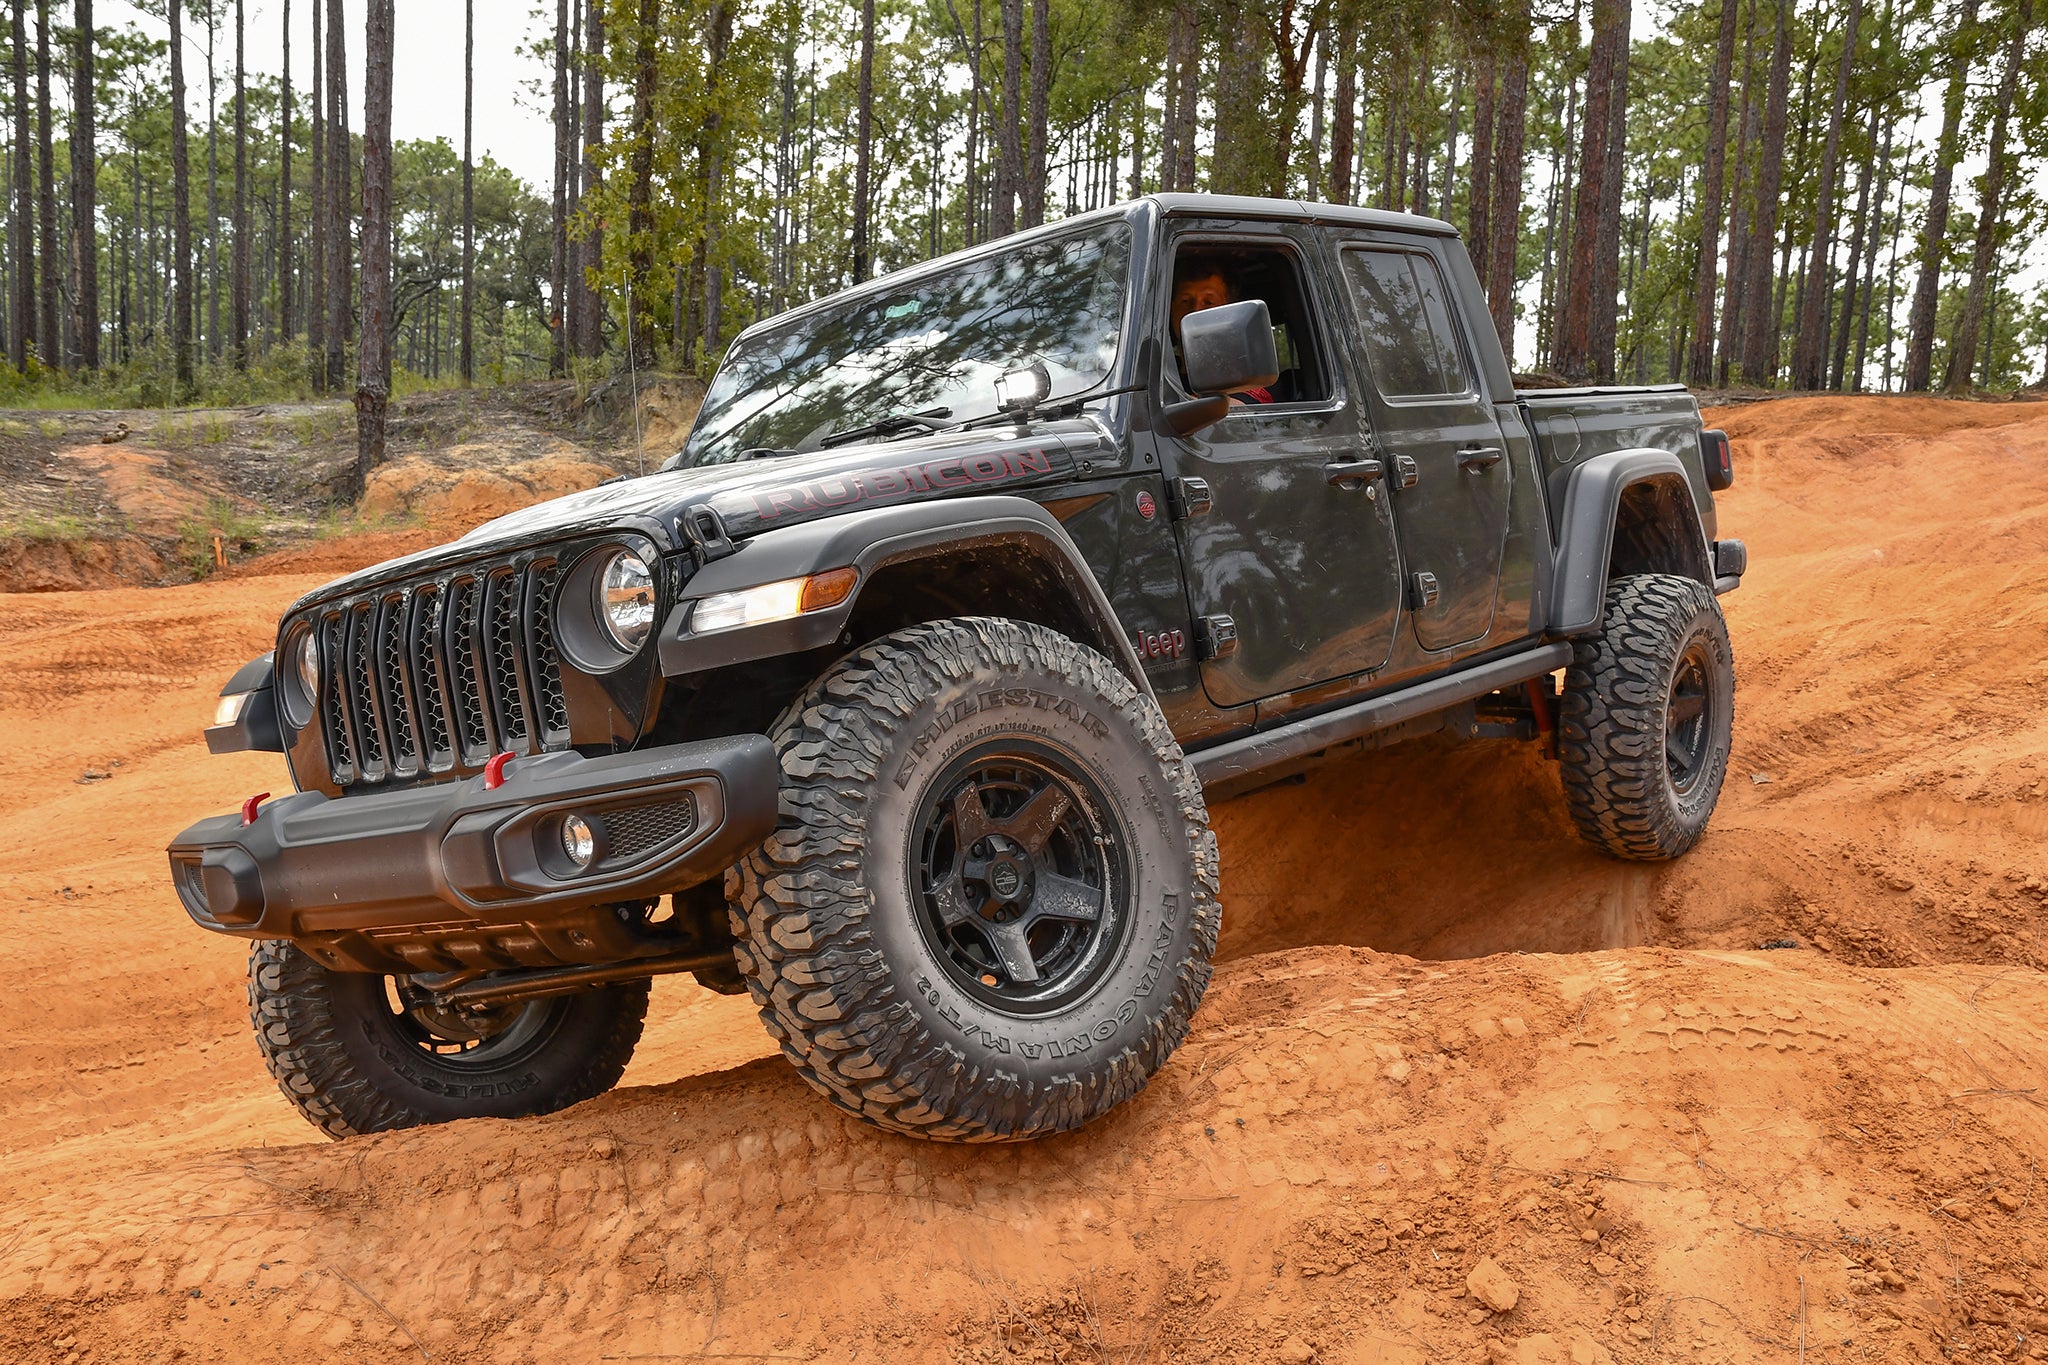 overland sector wheels jeep gladiator rubicon on 17x9 satin black atlas wheels in woods clay red dirt trail